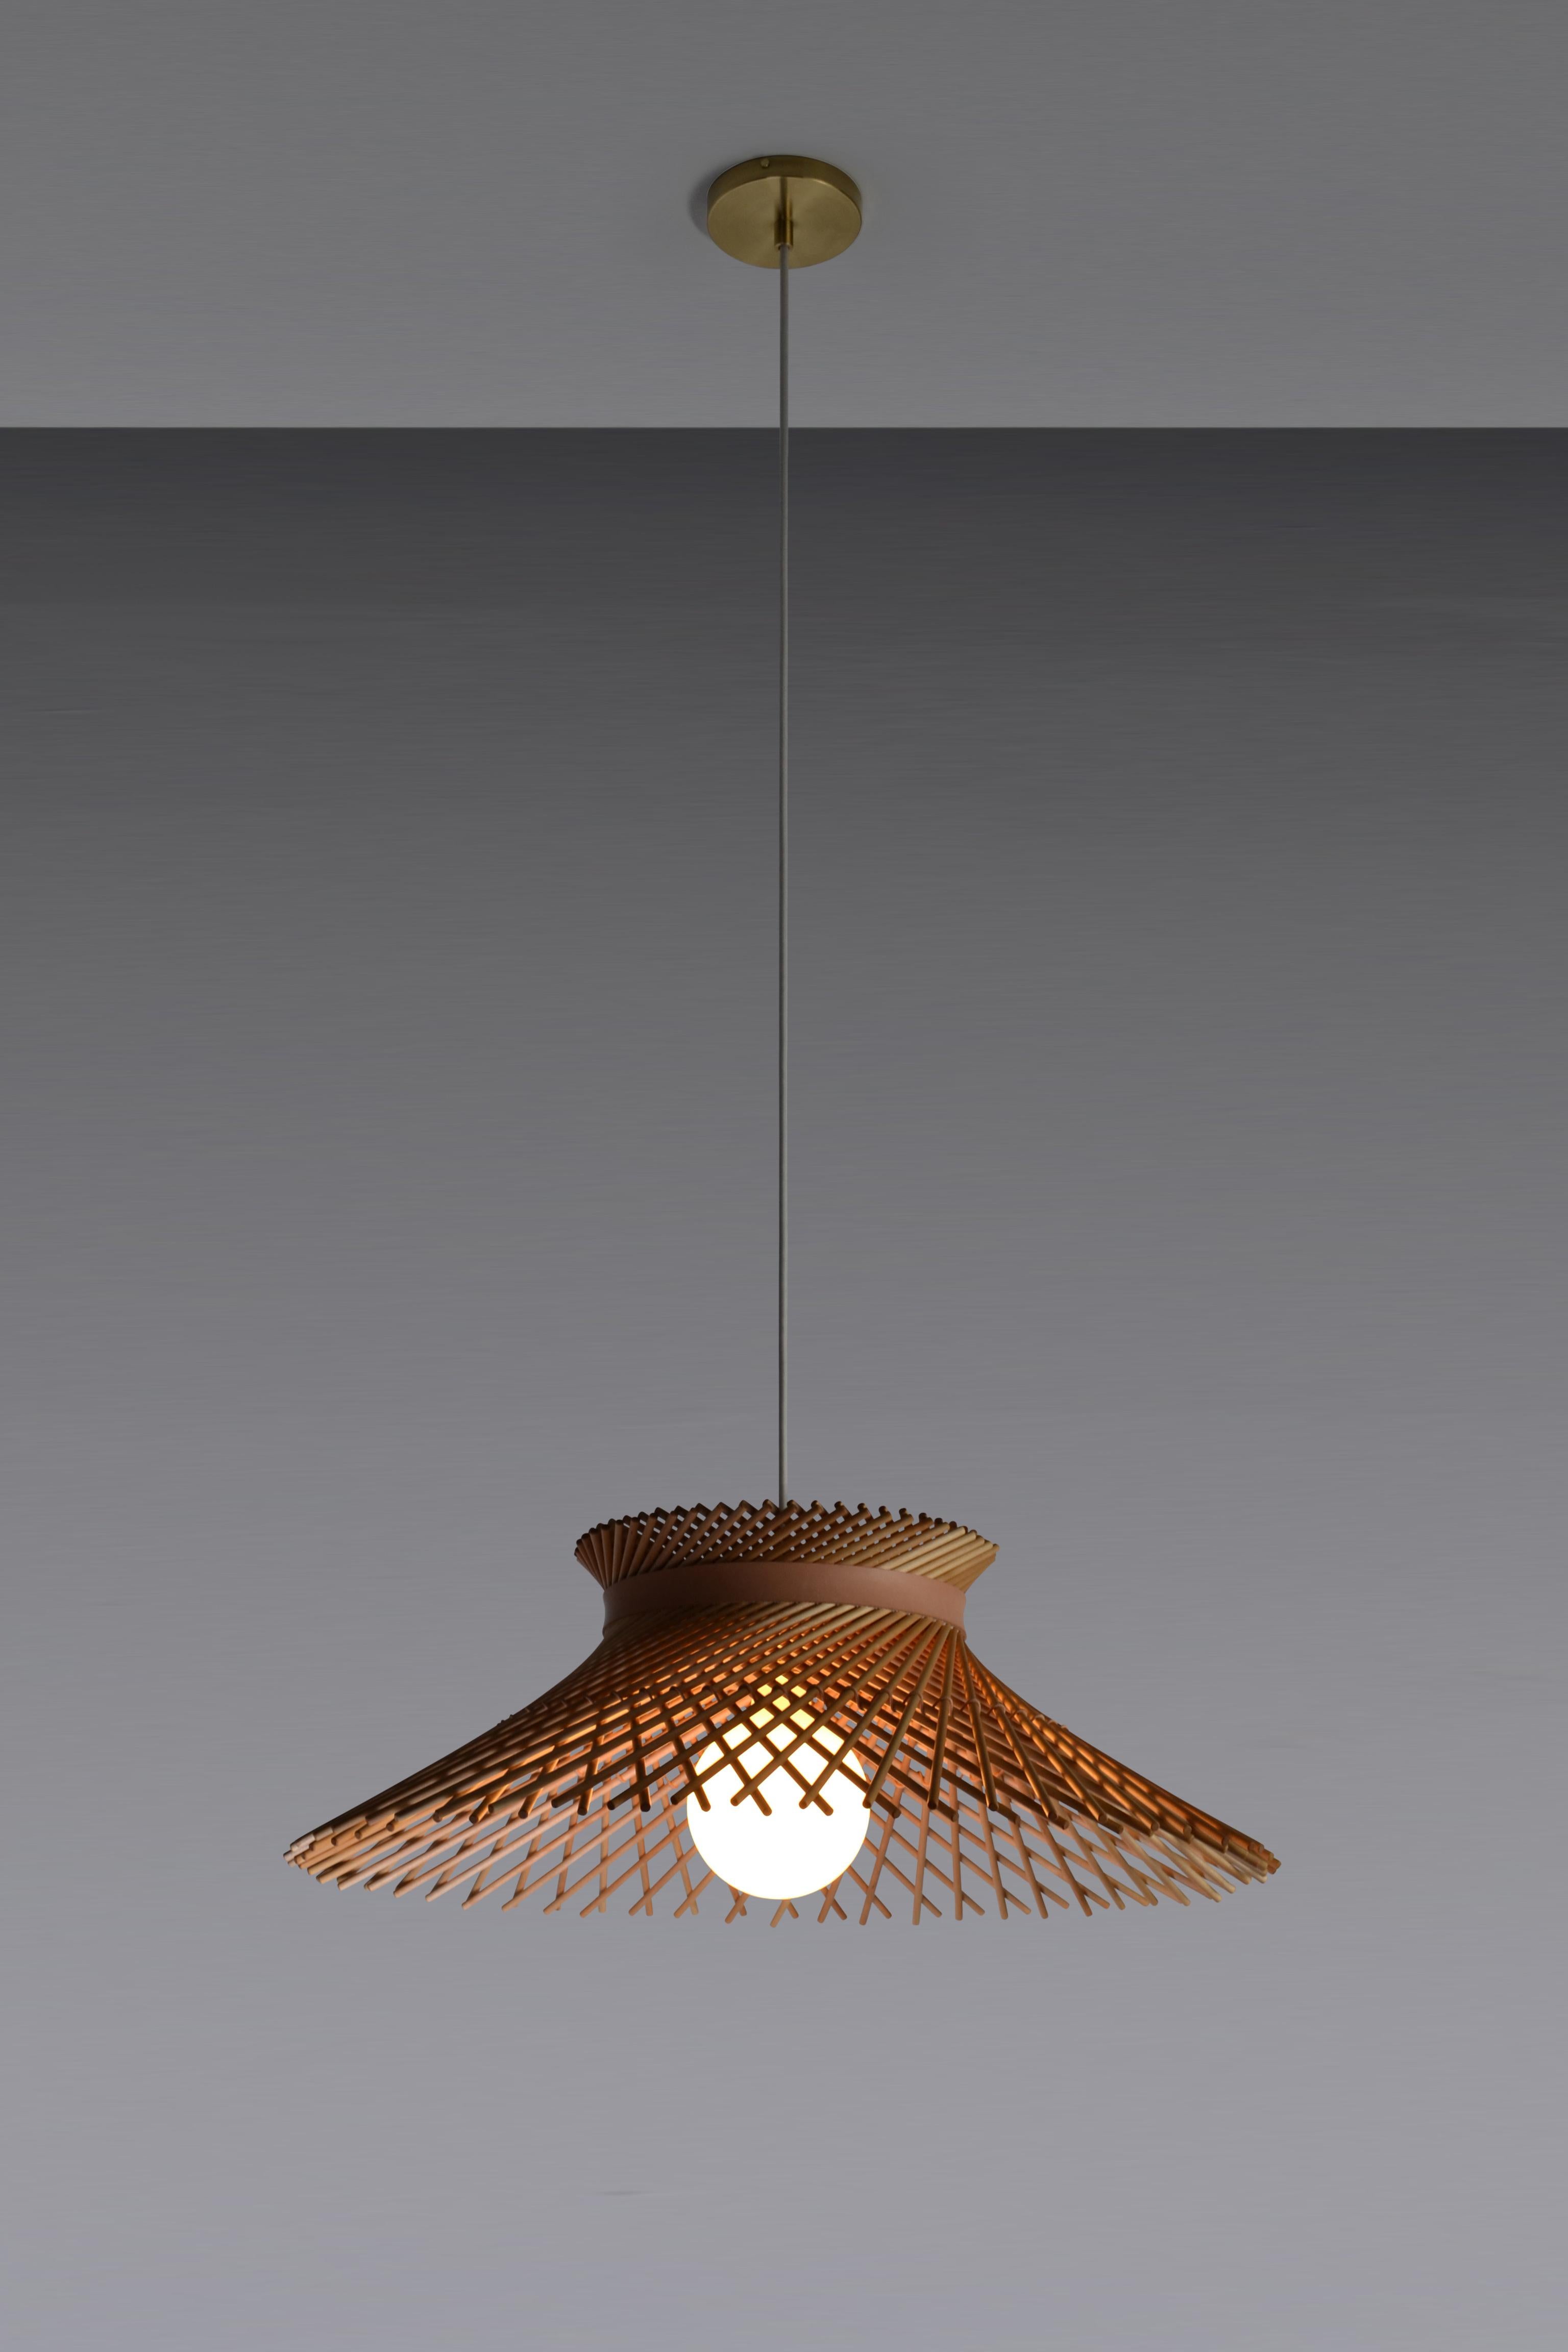 American Mooda Ceiling Pendant Light 9 / Natural Oak Wood, Crema Marfil Marble by INDO- For Sale